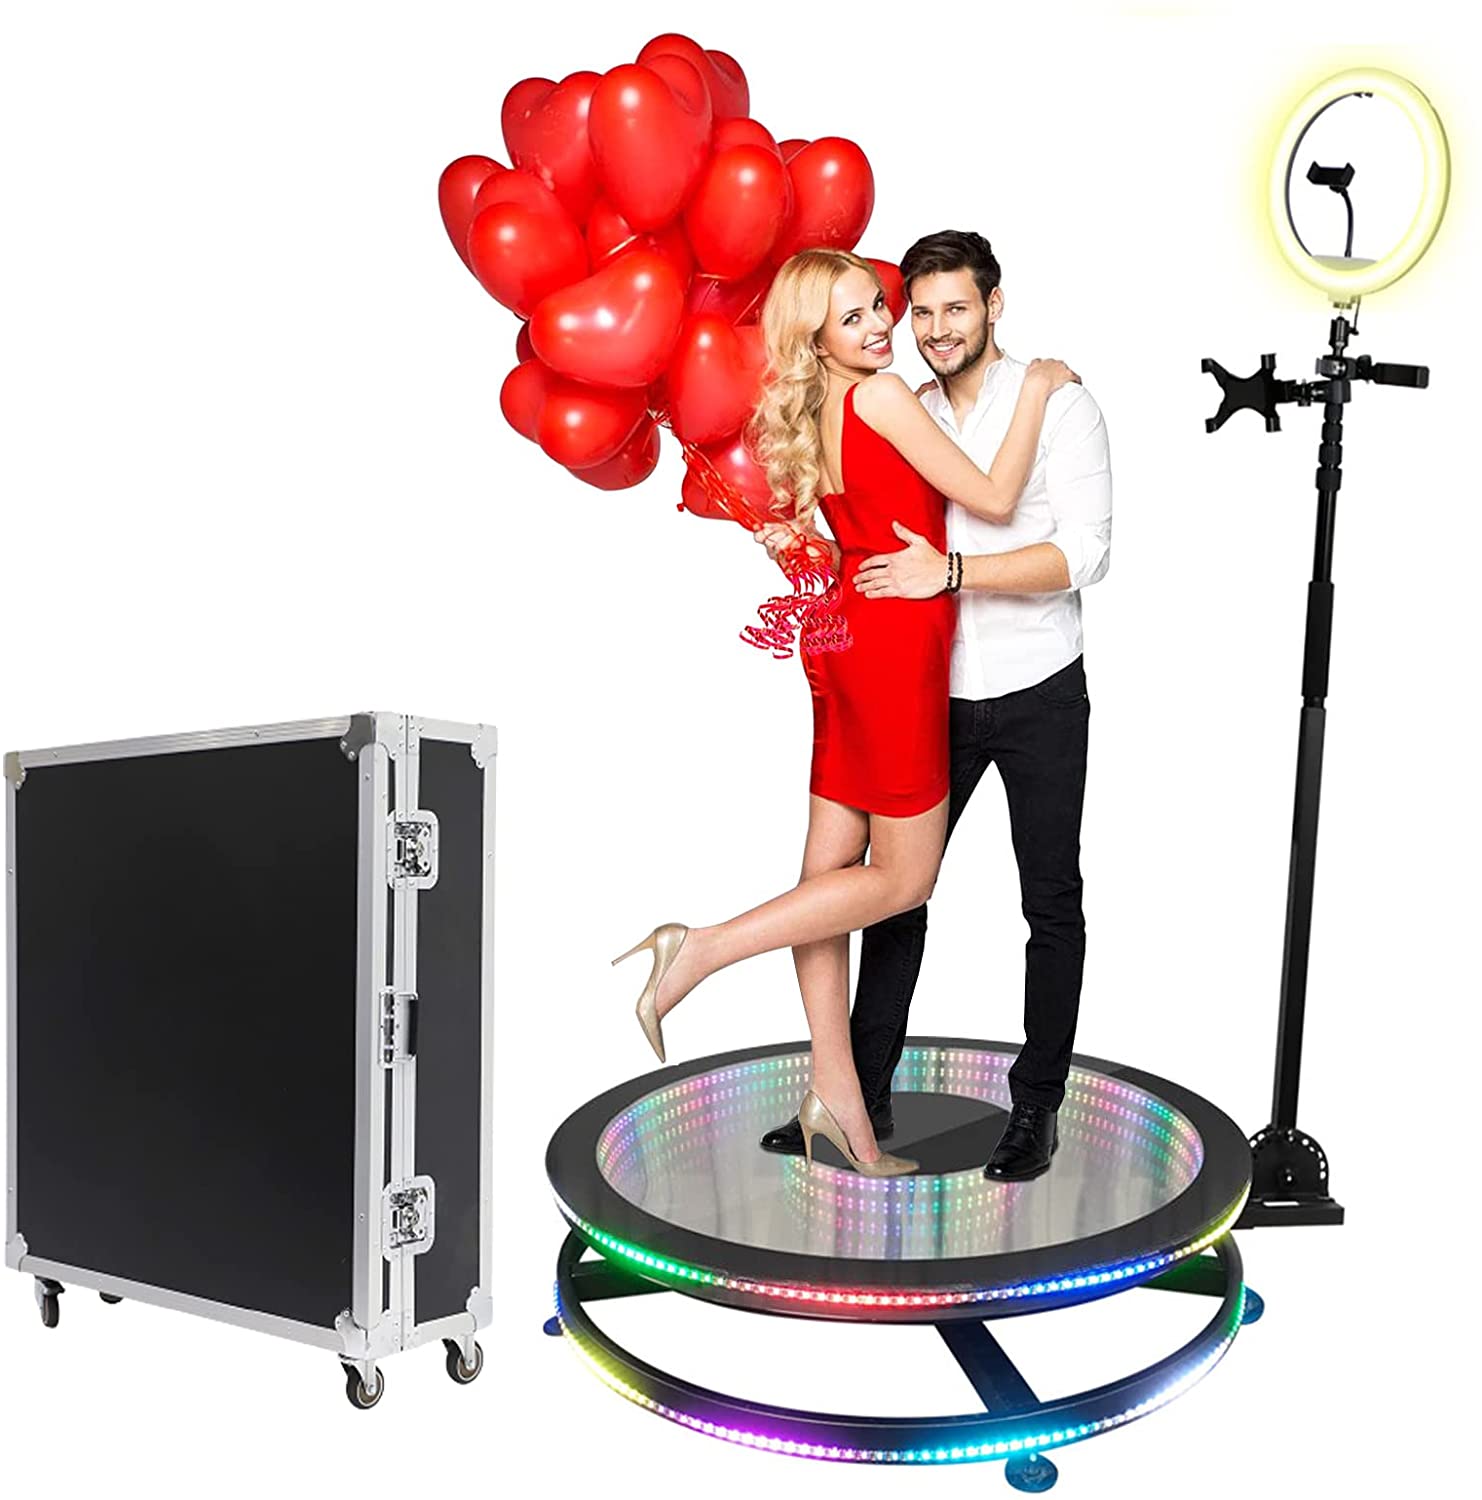 How does a photo booth system for sale work?